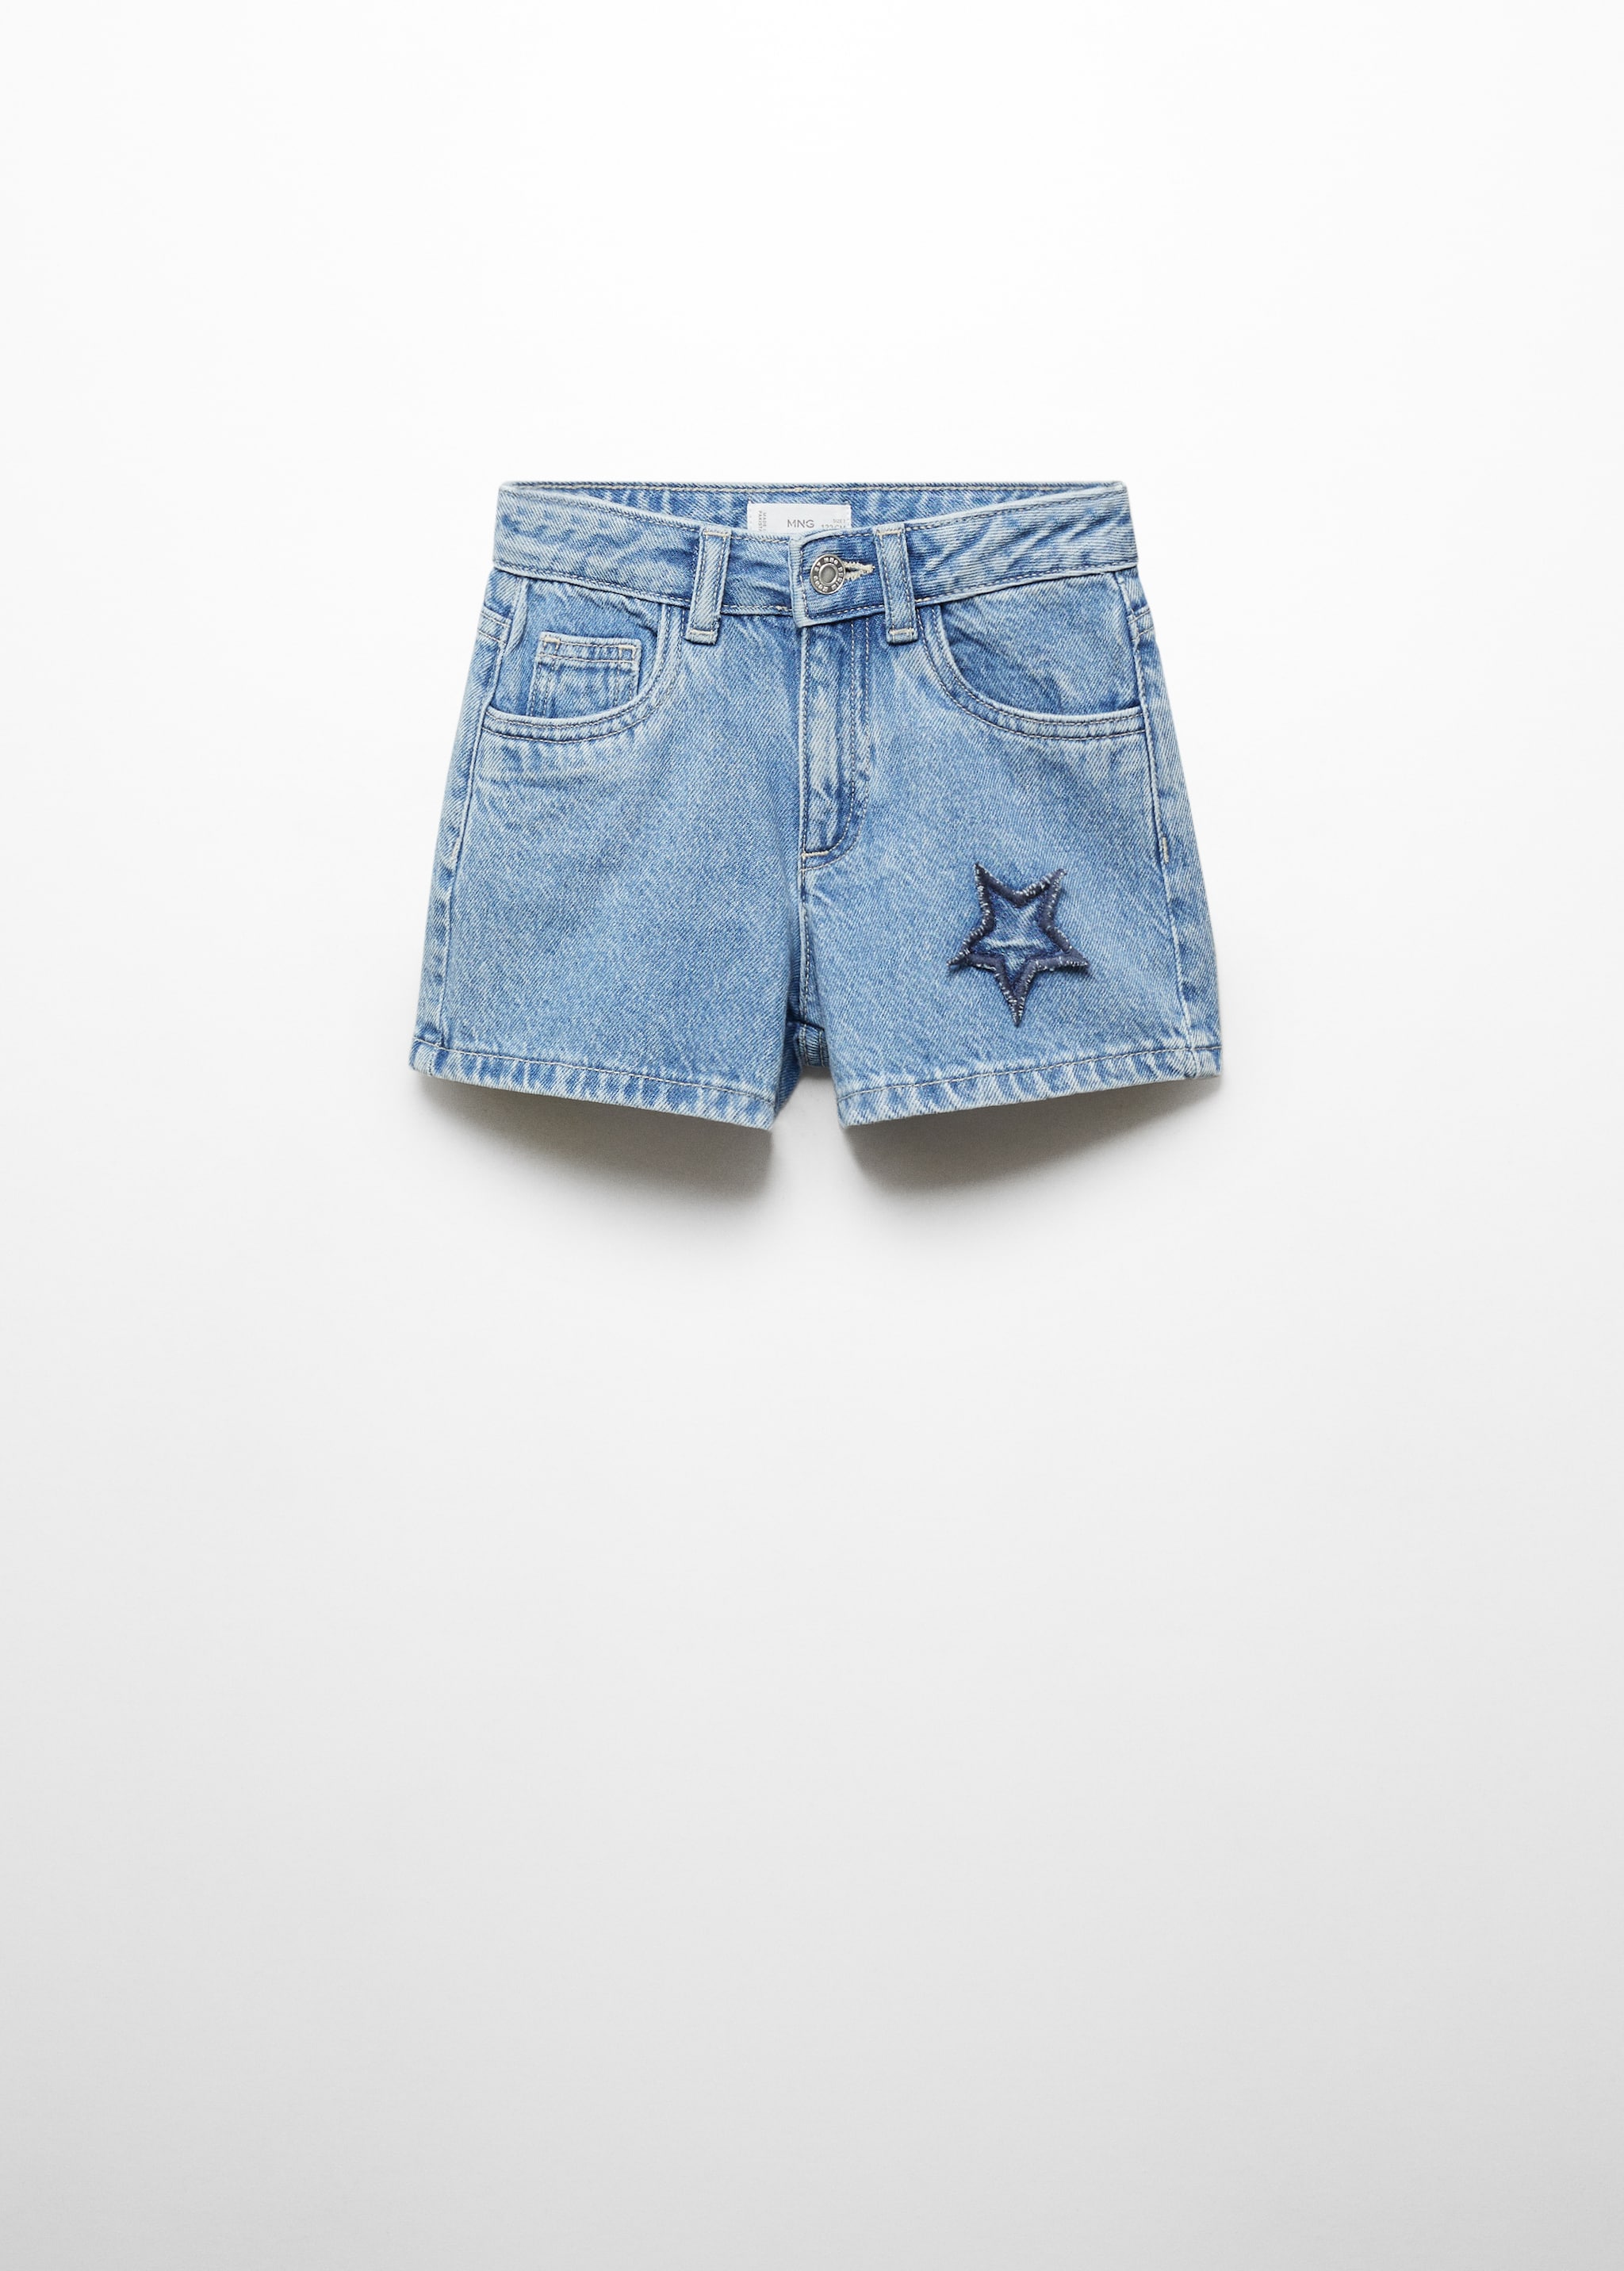 Star denim shorts - Article without model